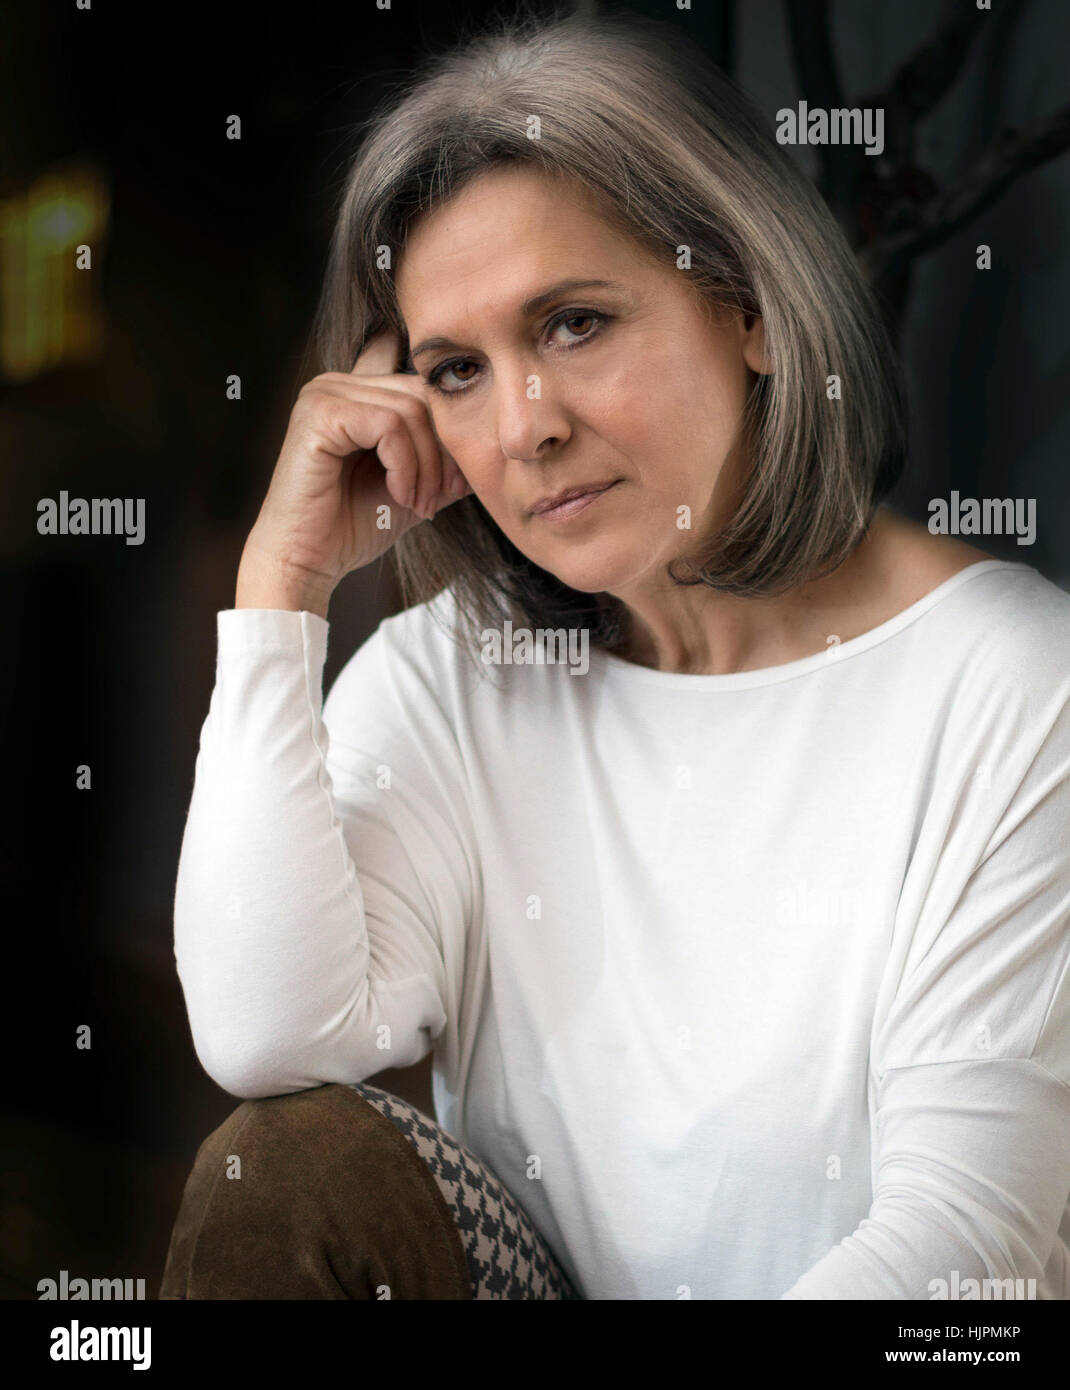 Mature Woman looking serious, thinking, arm on knee, hand on cheek. Stock Photo